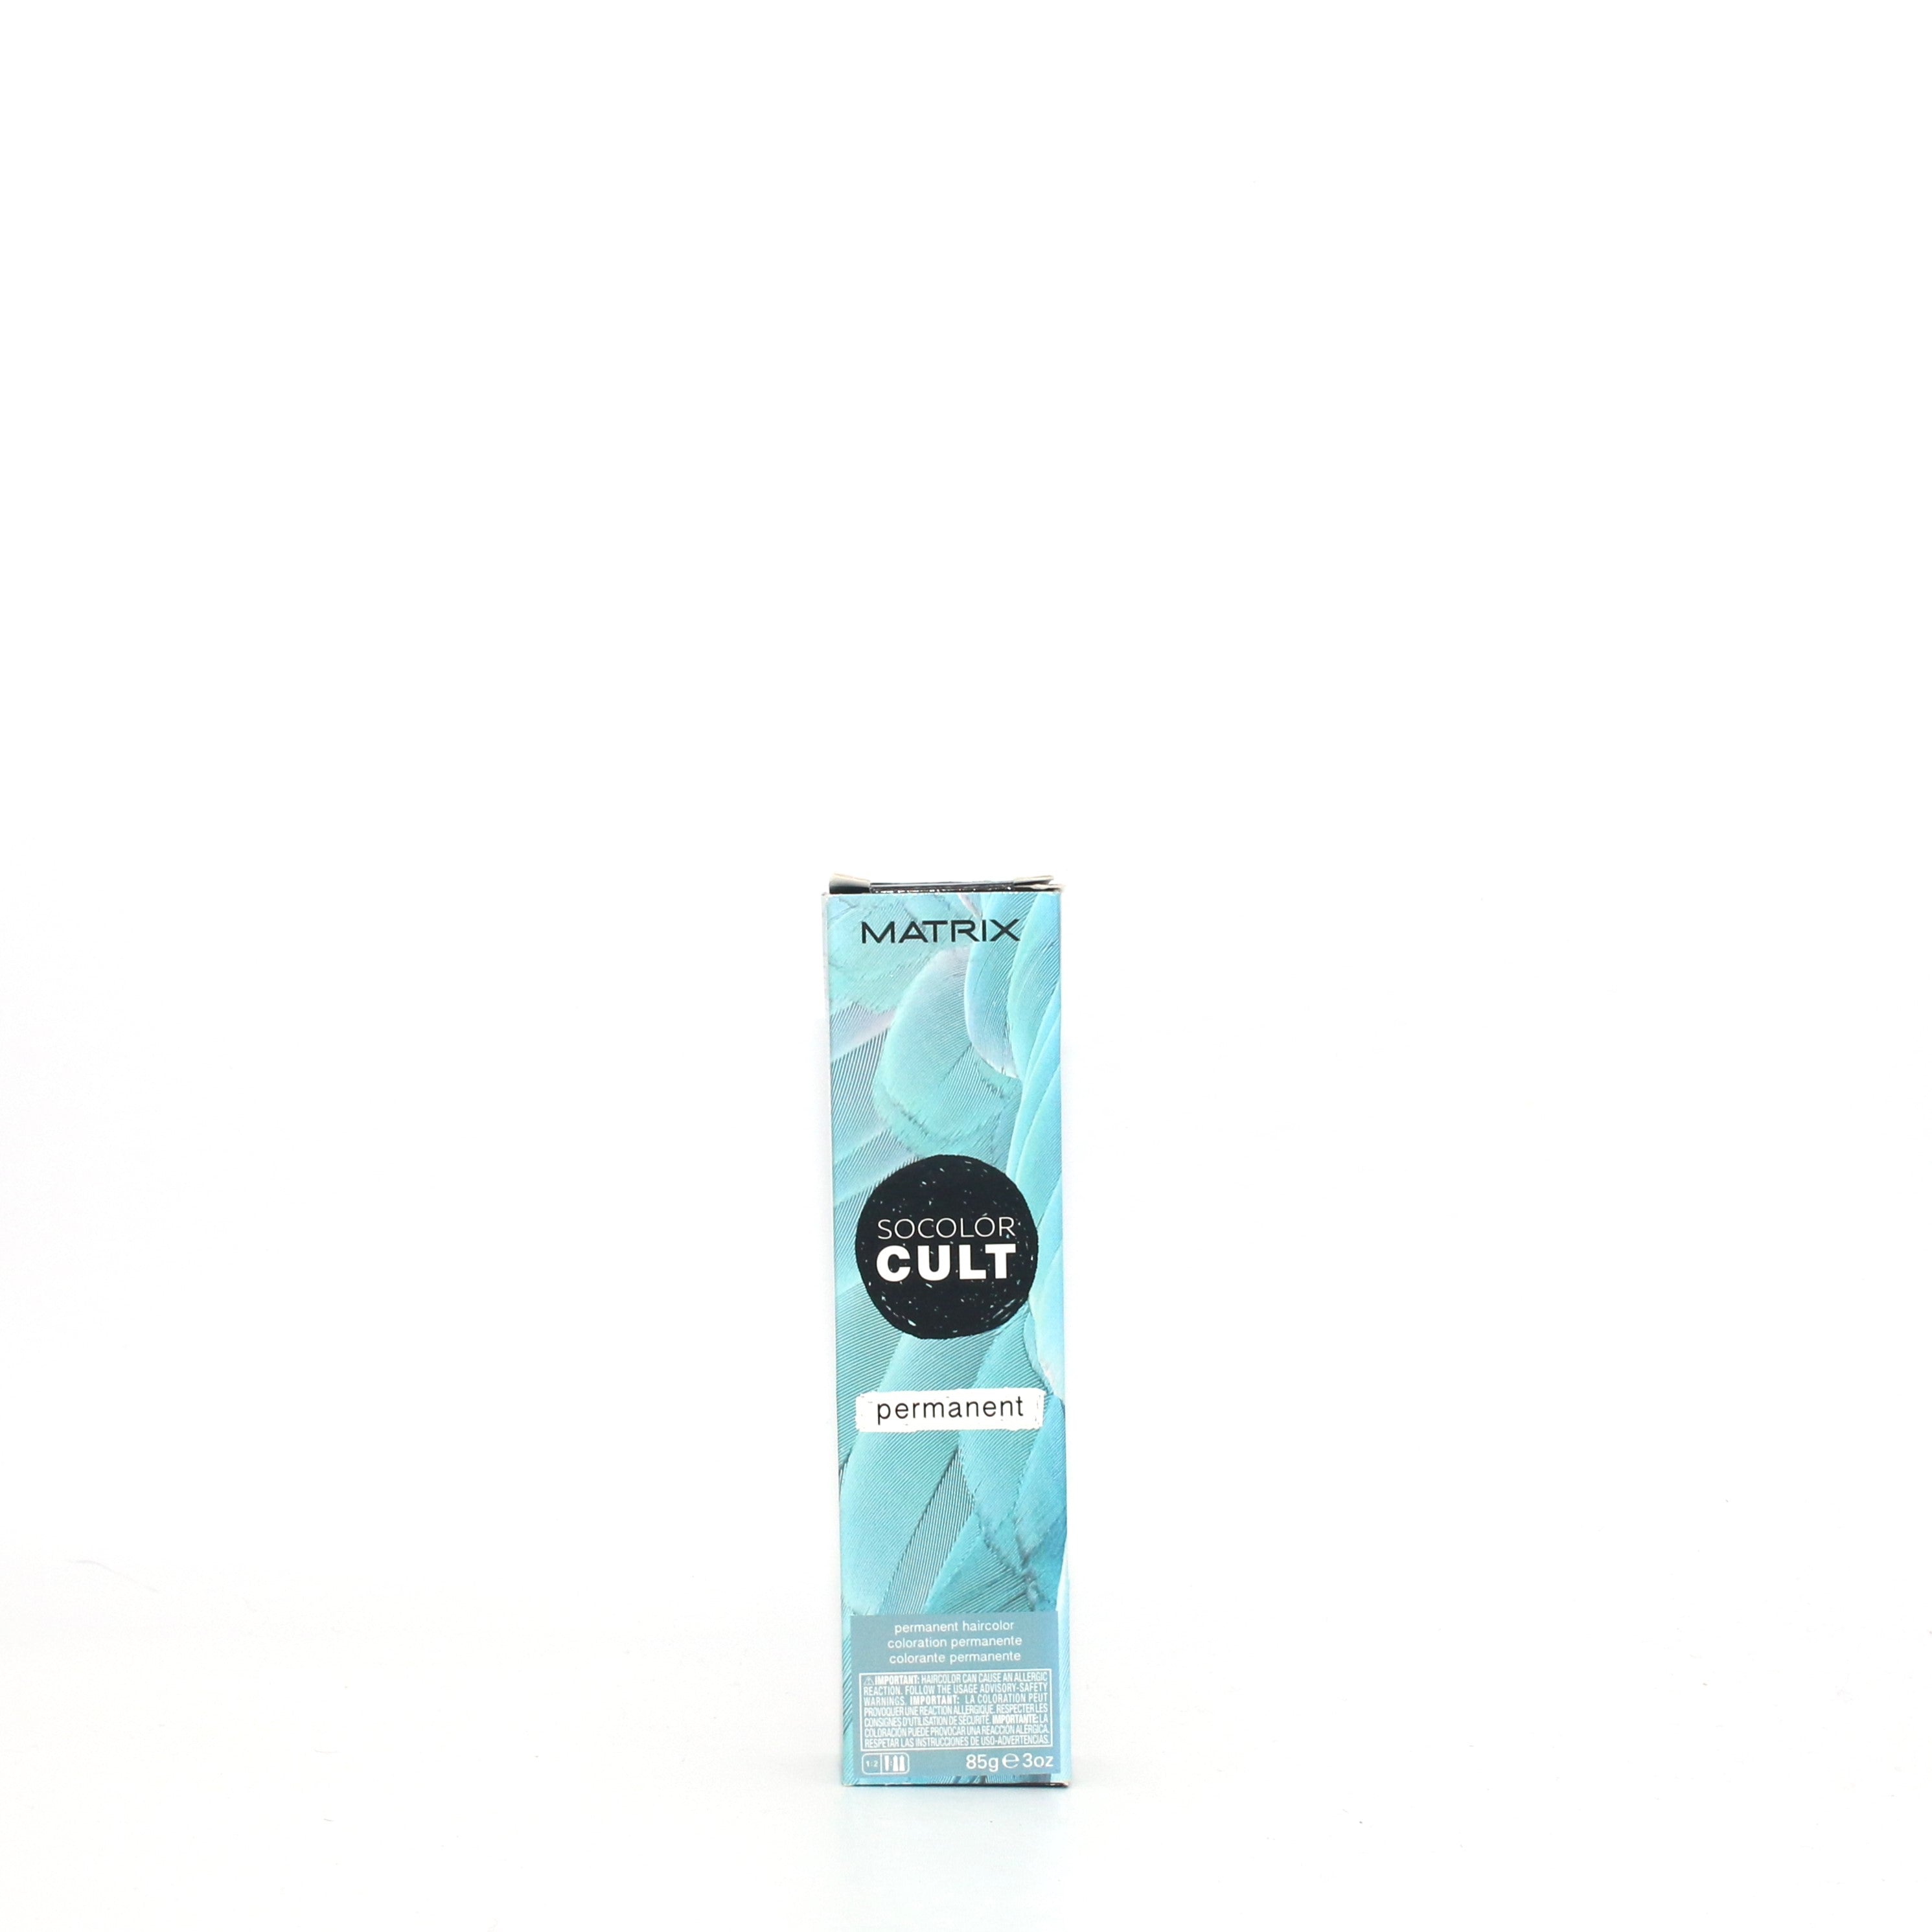 Matrix SoColor Cult Demi Perm Haircolor - Dusty Teal - Pack of 1 with Sleek  Comb 